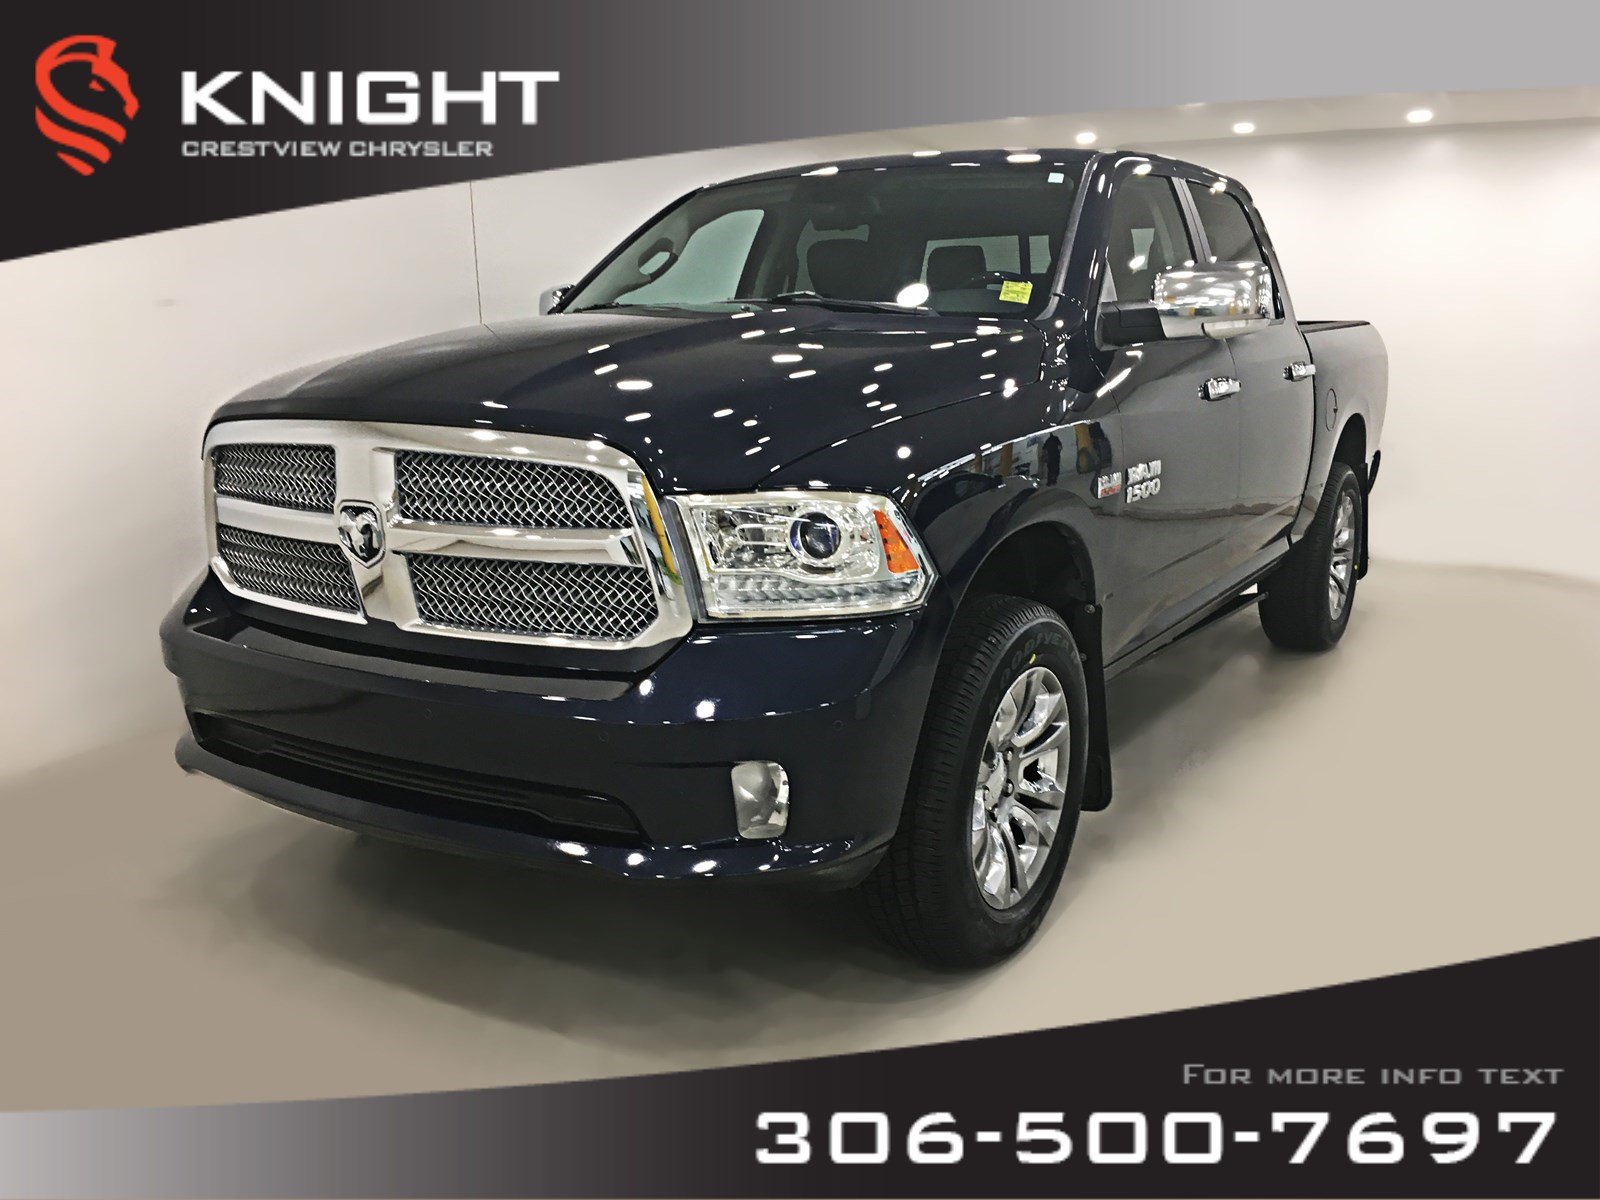 Pre Owned 2014 Ram 1500 Longhorn Limited Crew Cab Sunroof Navigtation 4wd Crew Cab Pickup